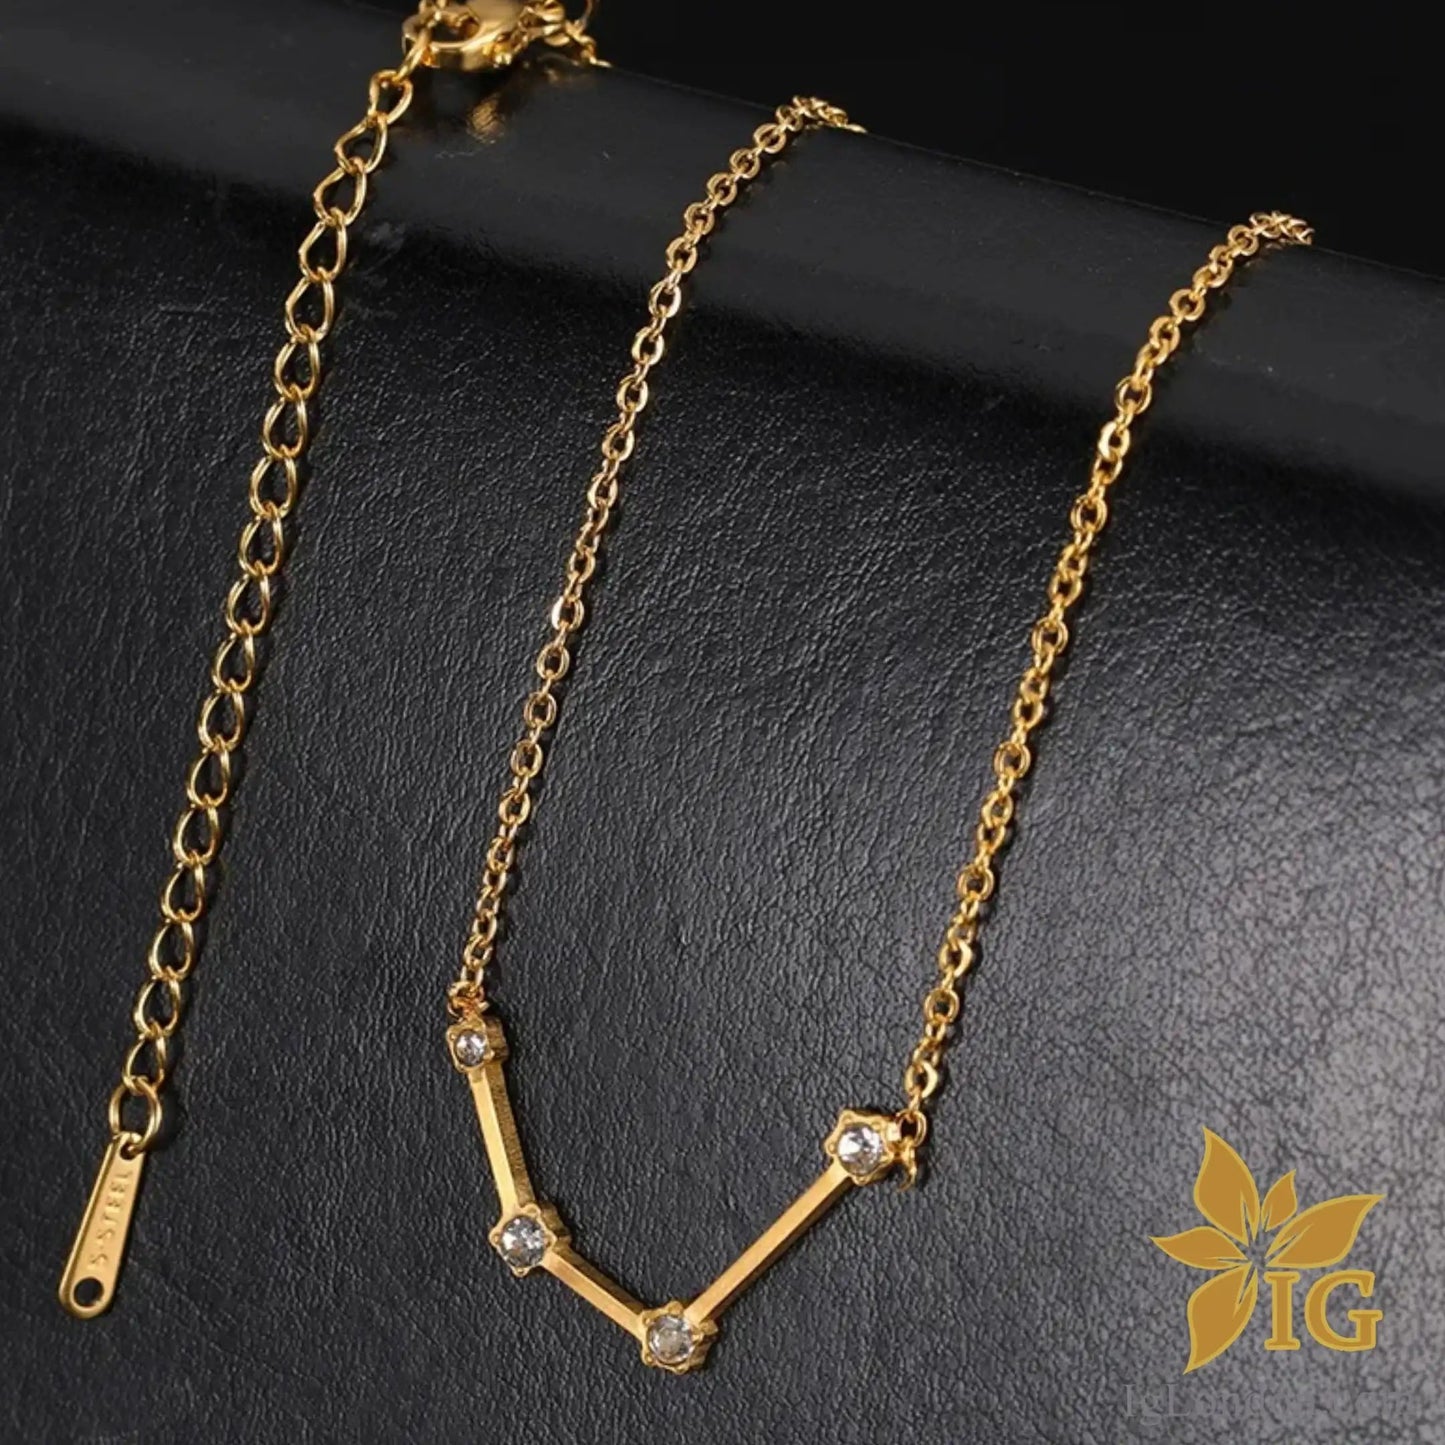 Zodiac Necklace Stainless steel gold plated